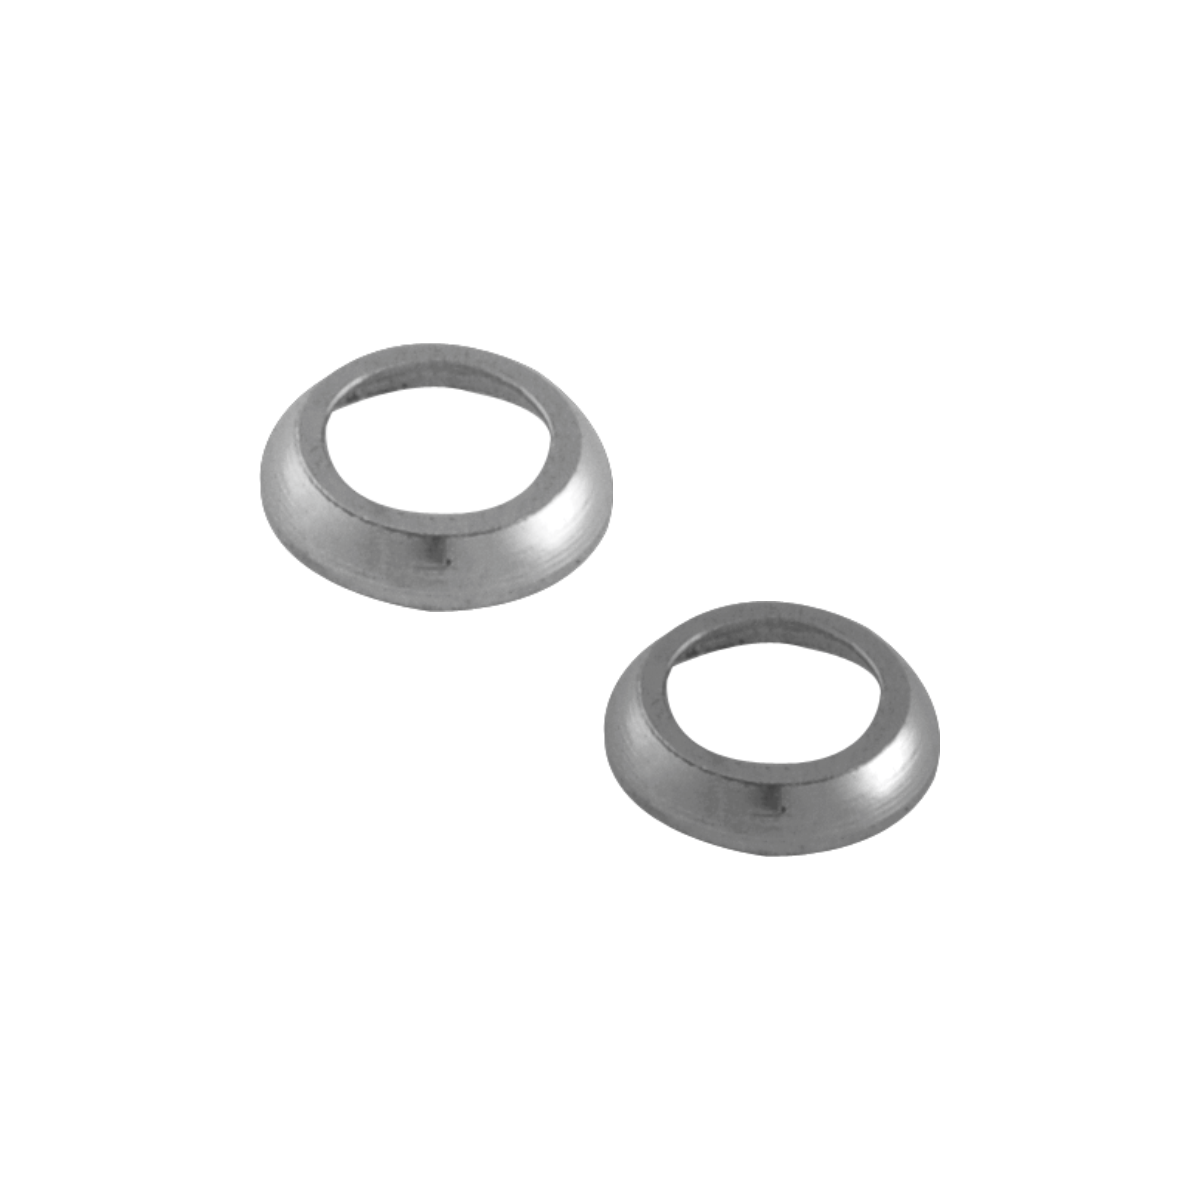 WASHER-FOR-3.5-MM-LOCKING-SCREW